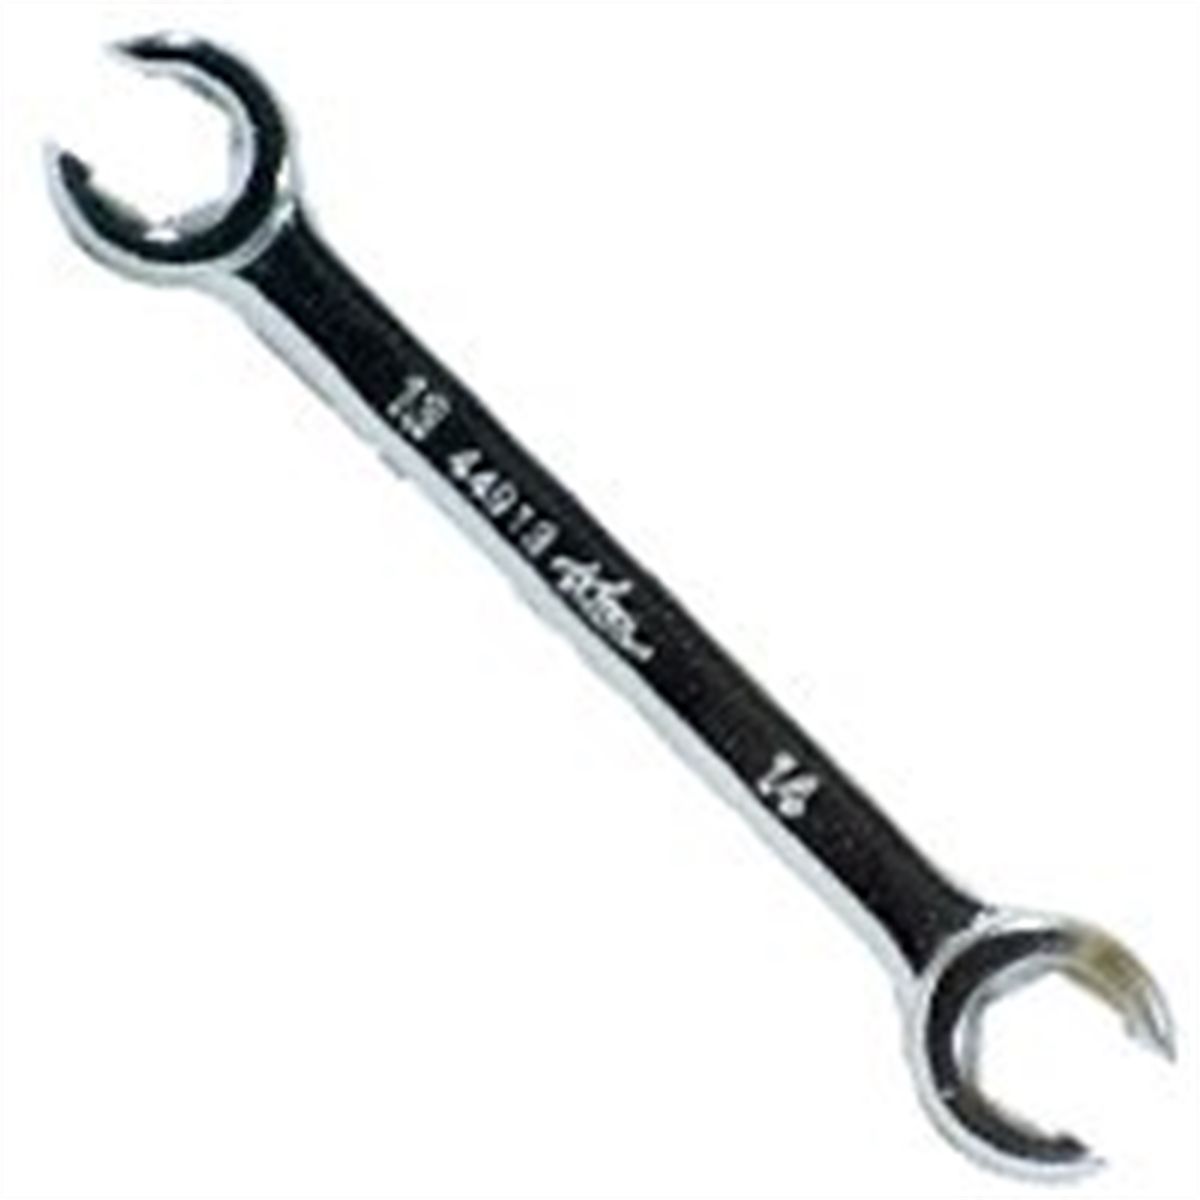 Metric Flare Nut Wrench - 10mm x 12mm